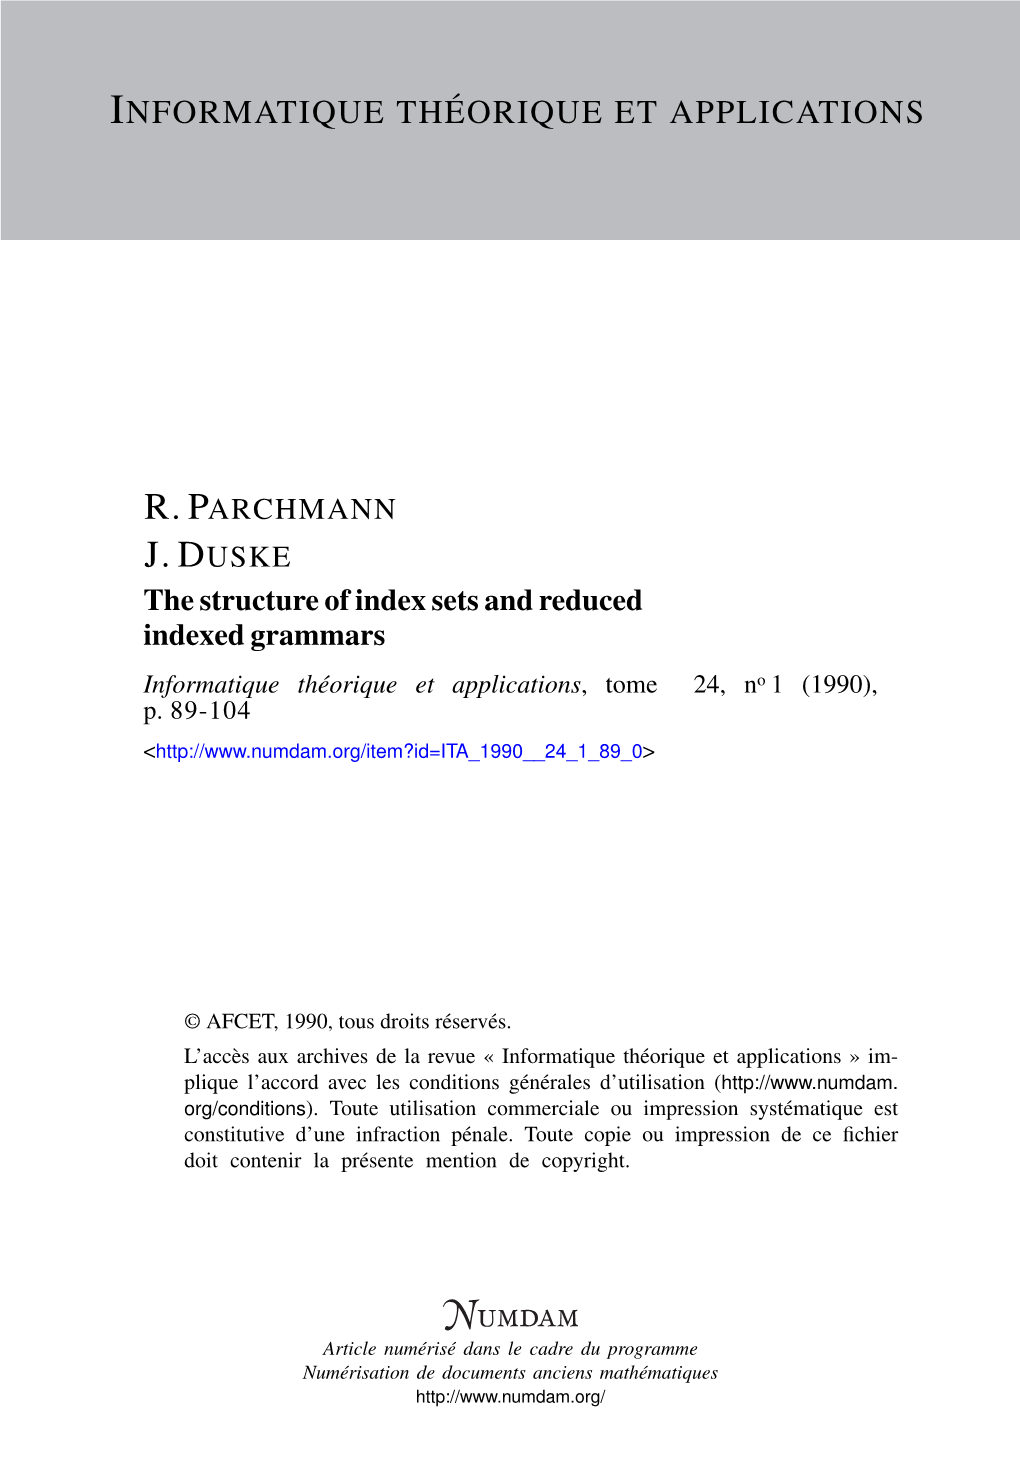 The Structure of Index Sets and Reduced Indexed Grammars Informatique Théorique Et Applications, Tome 24, No 1 (1990), P